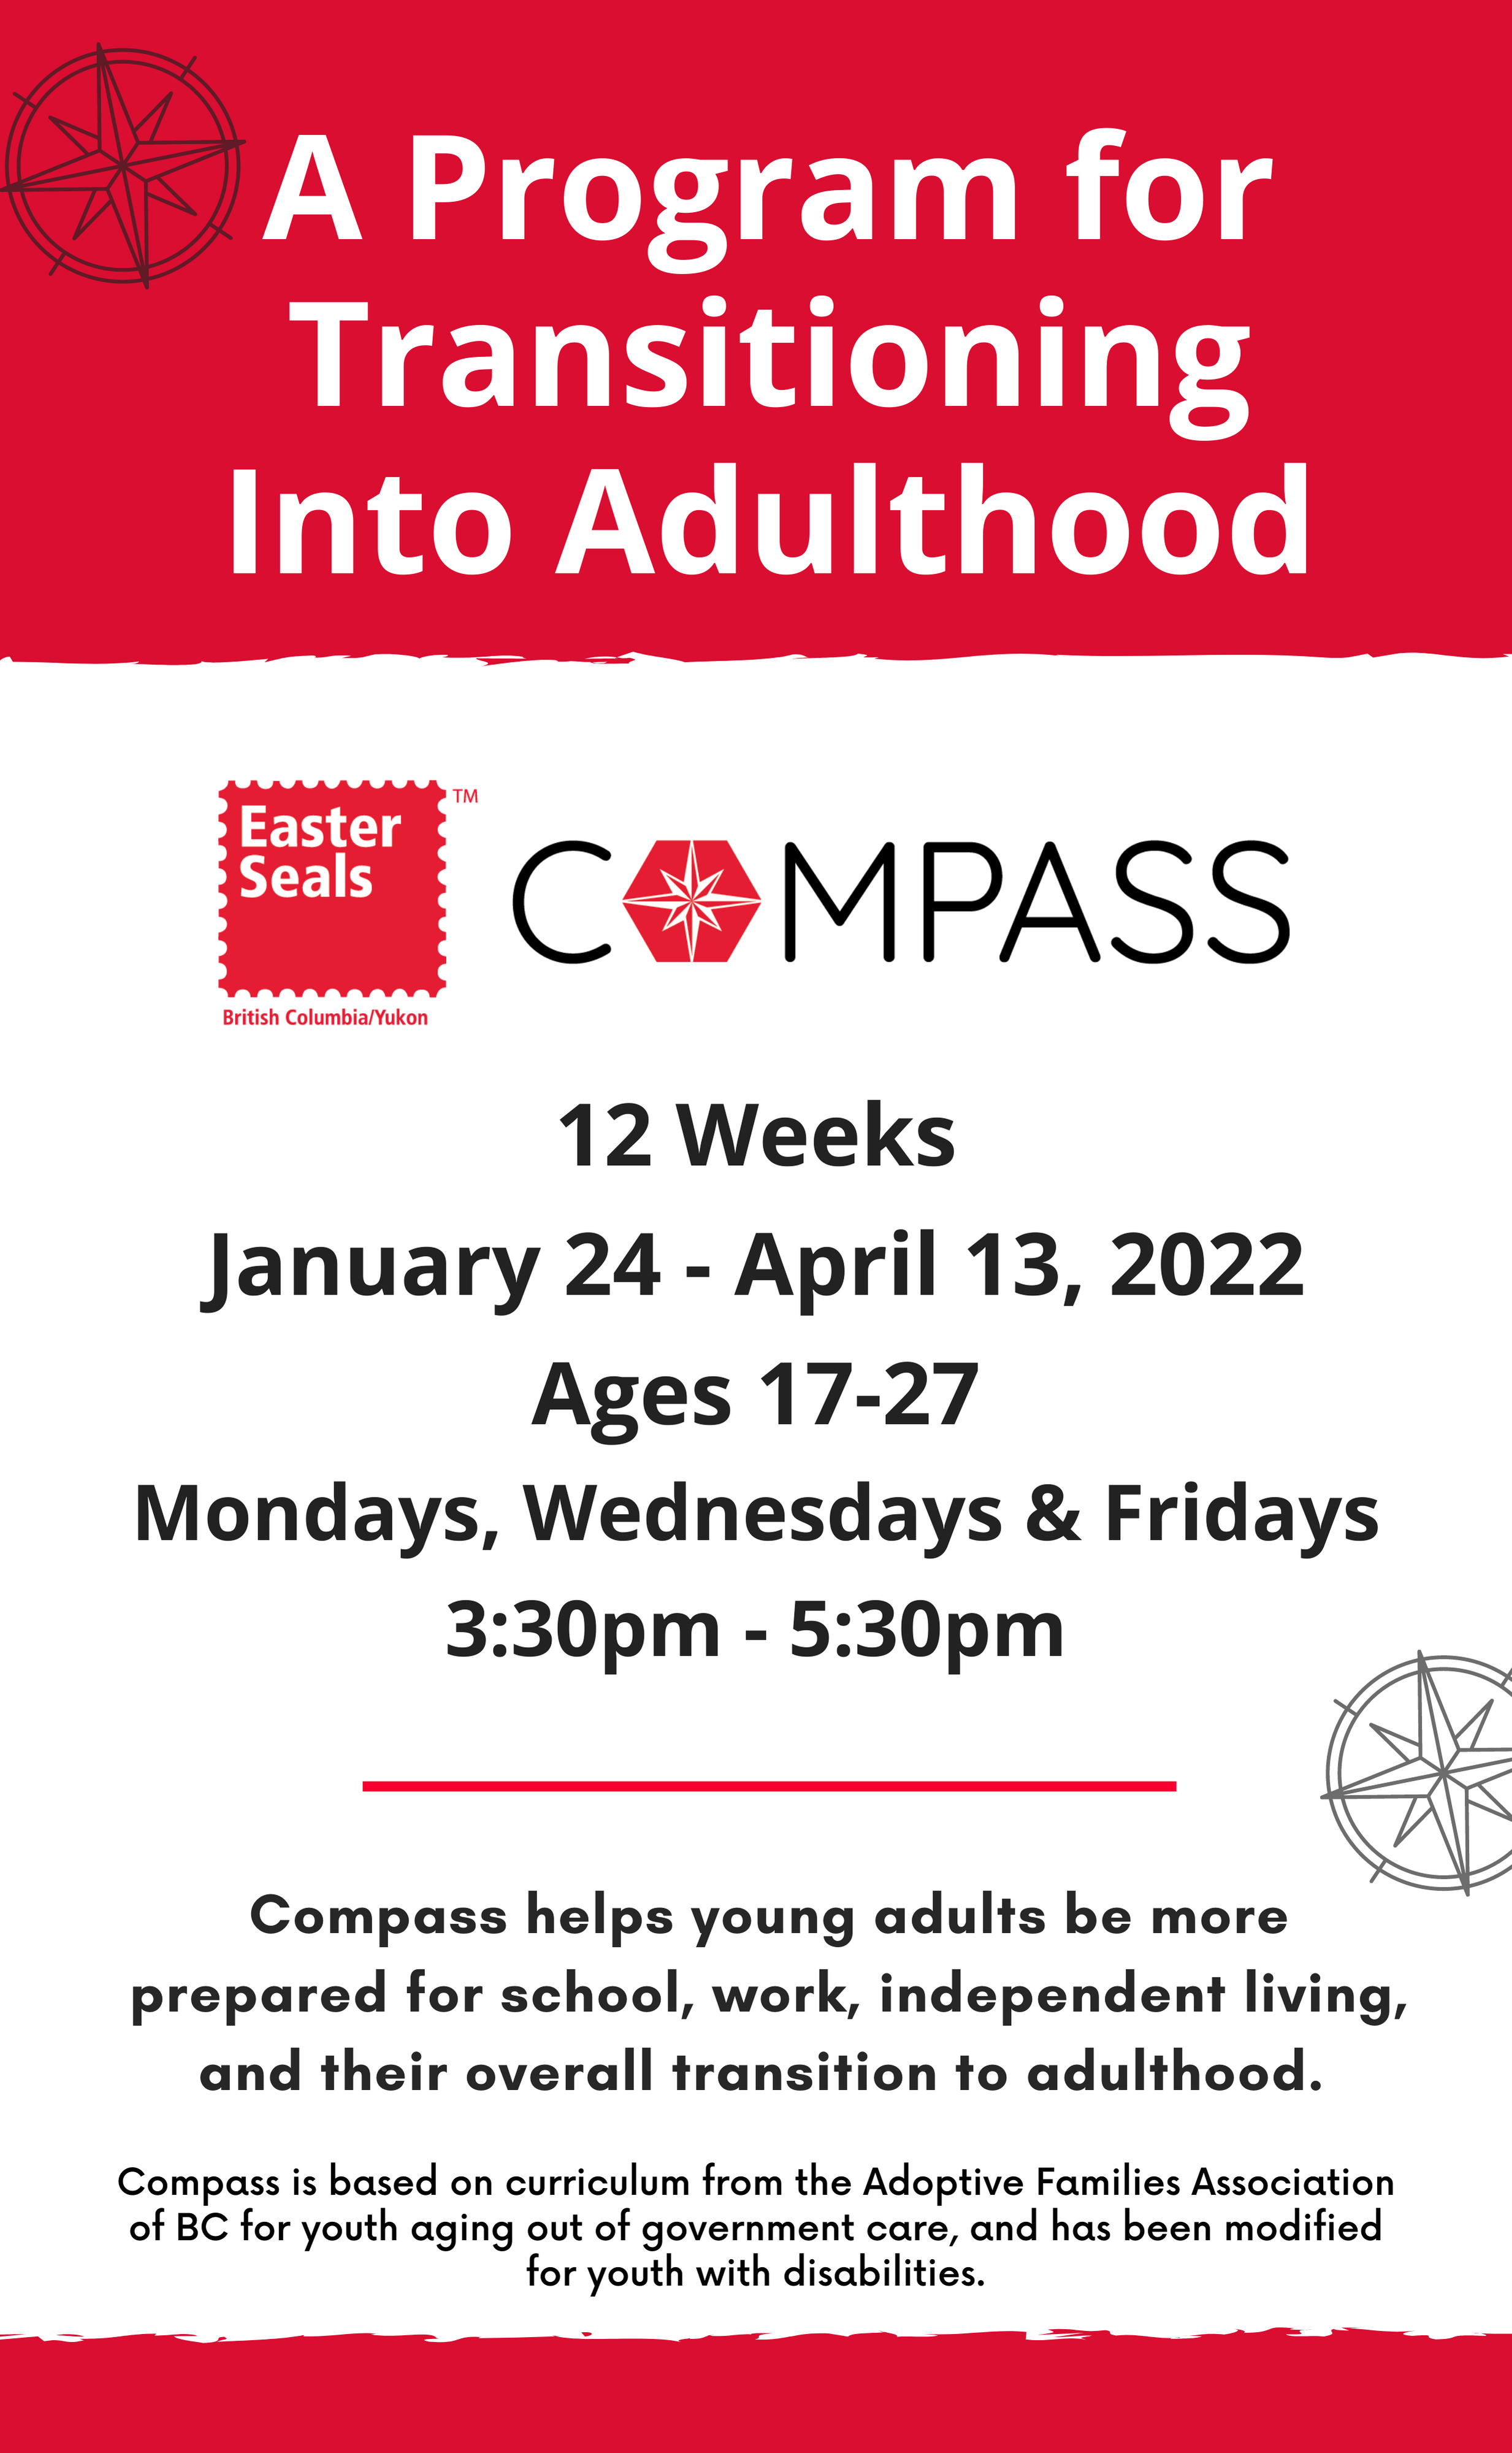 Compass Program - Tools for Transitioning into Adulthood